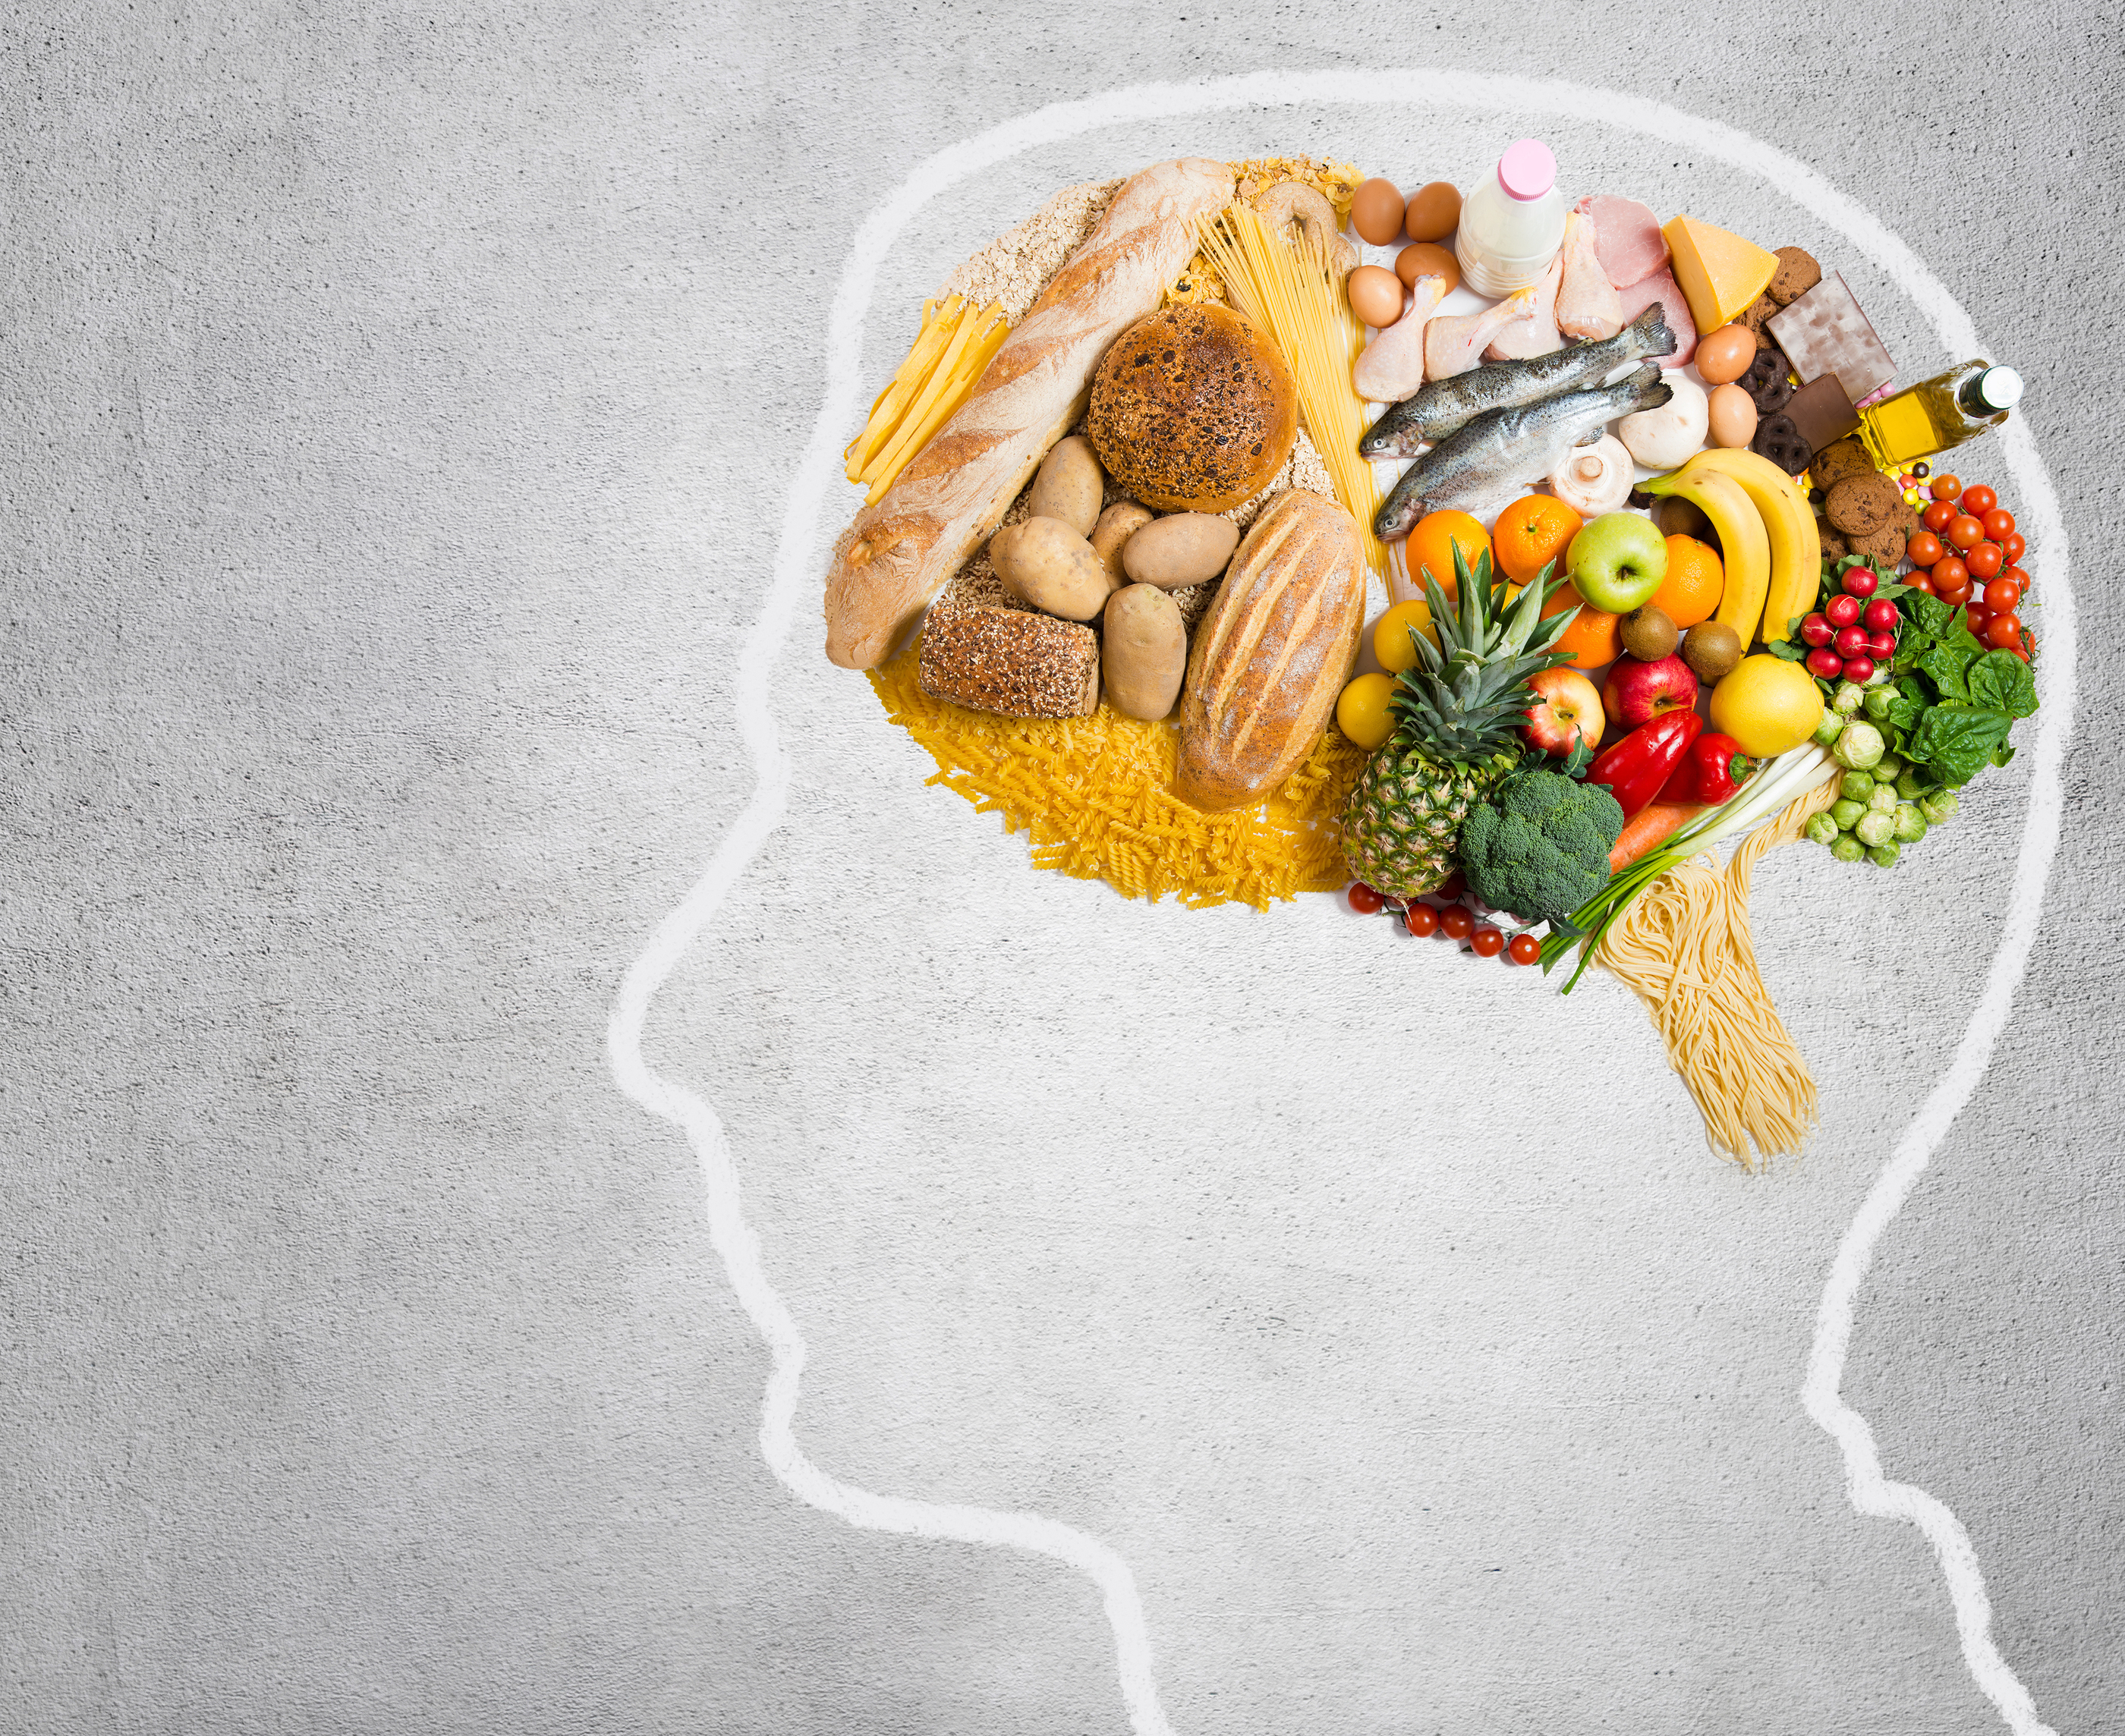 Diet plays a factor in psychological health, says a nutritional therapist